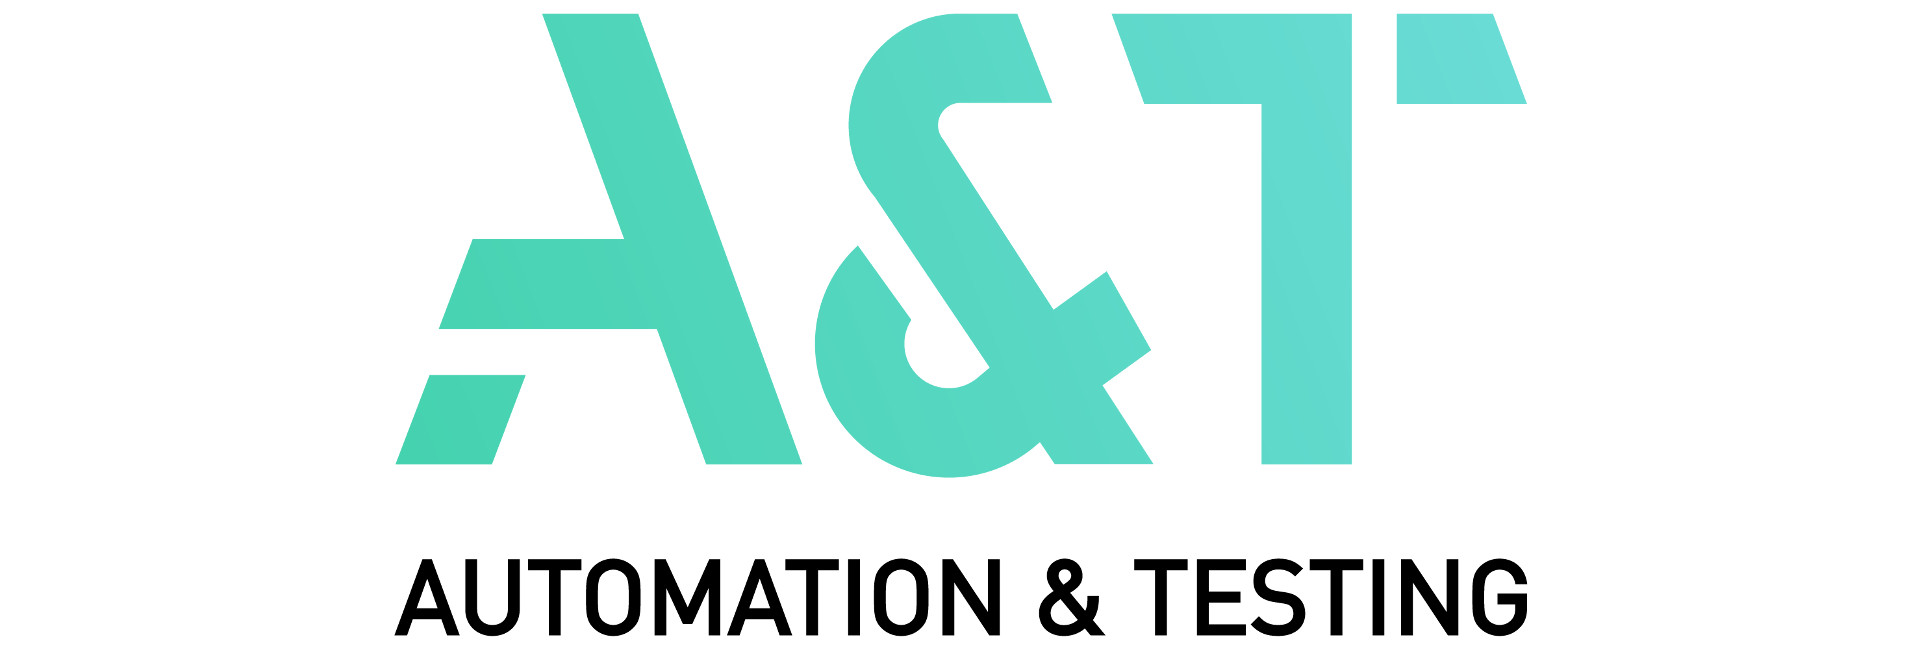 Fiera A&T (Automation and Testing) 18-19-20 Aprile 2018